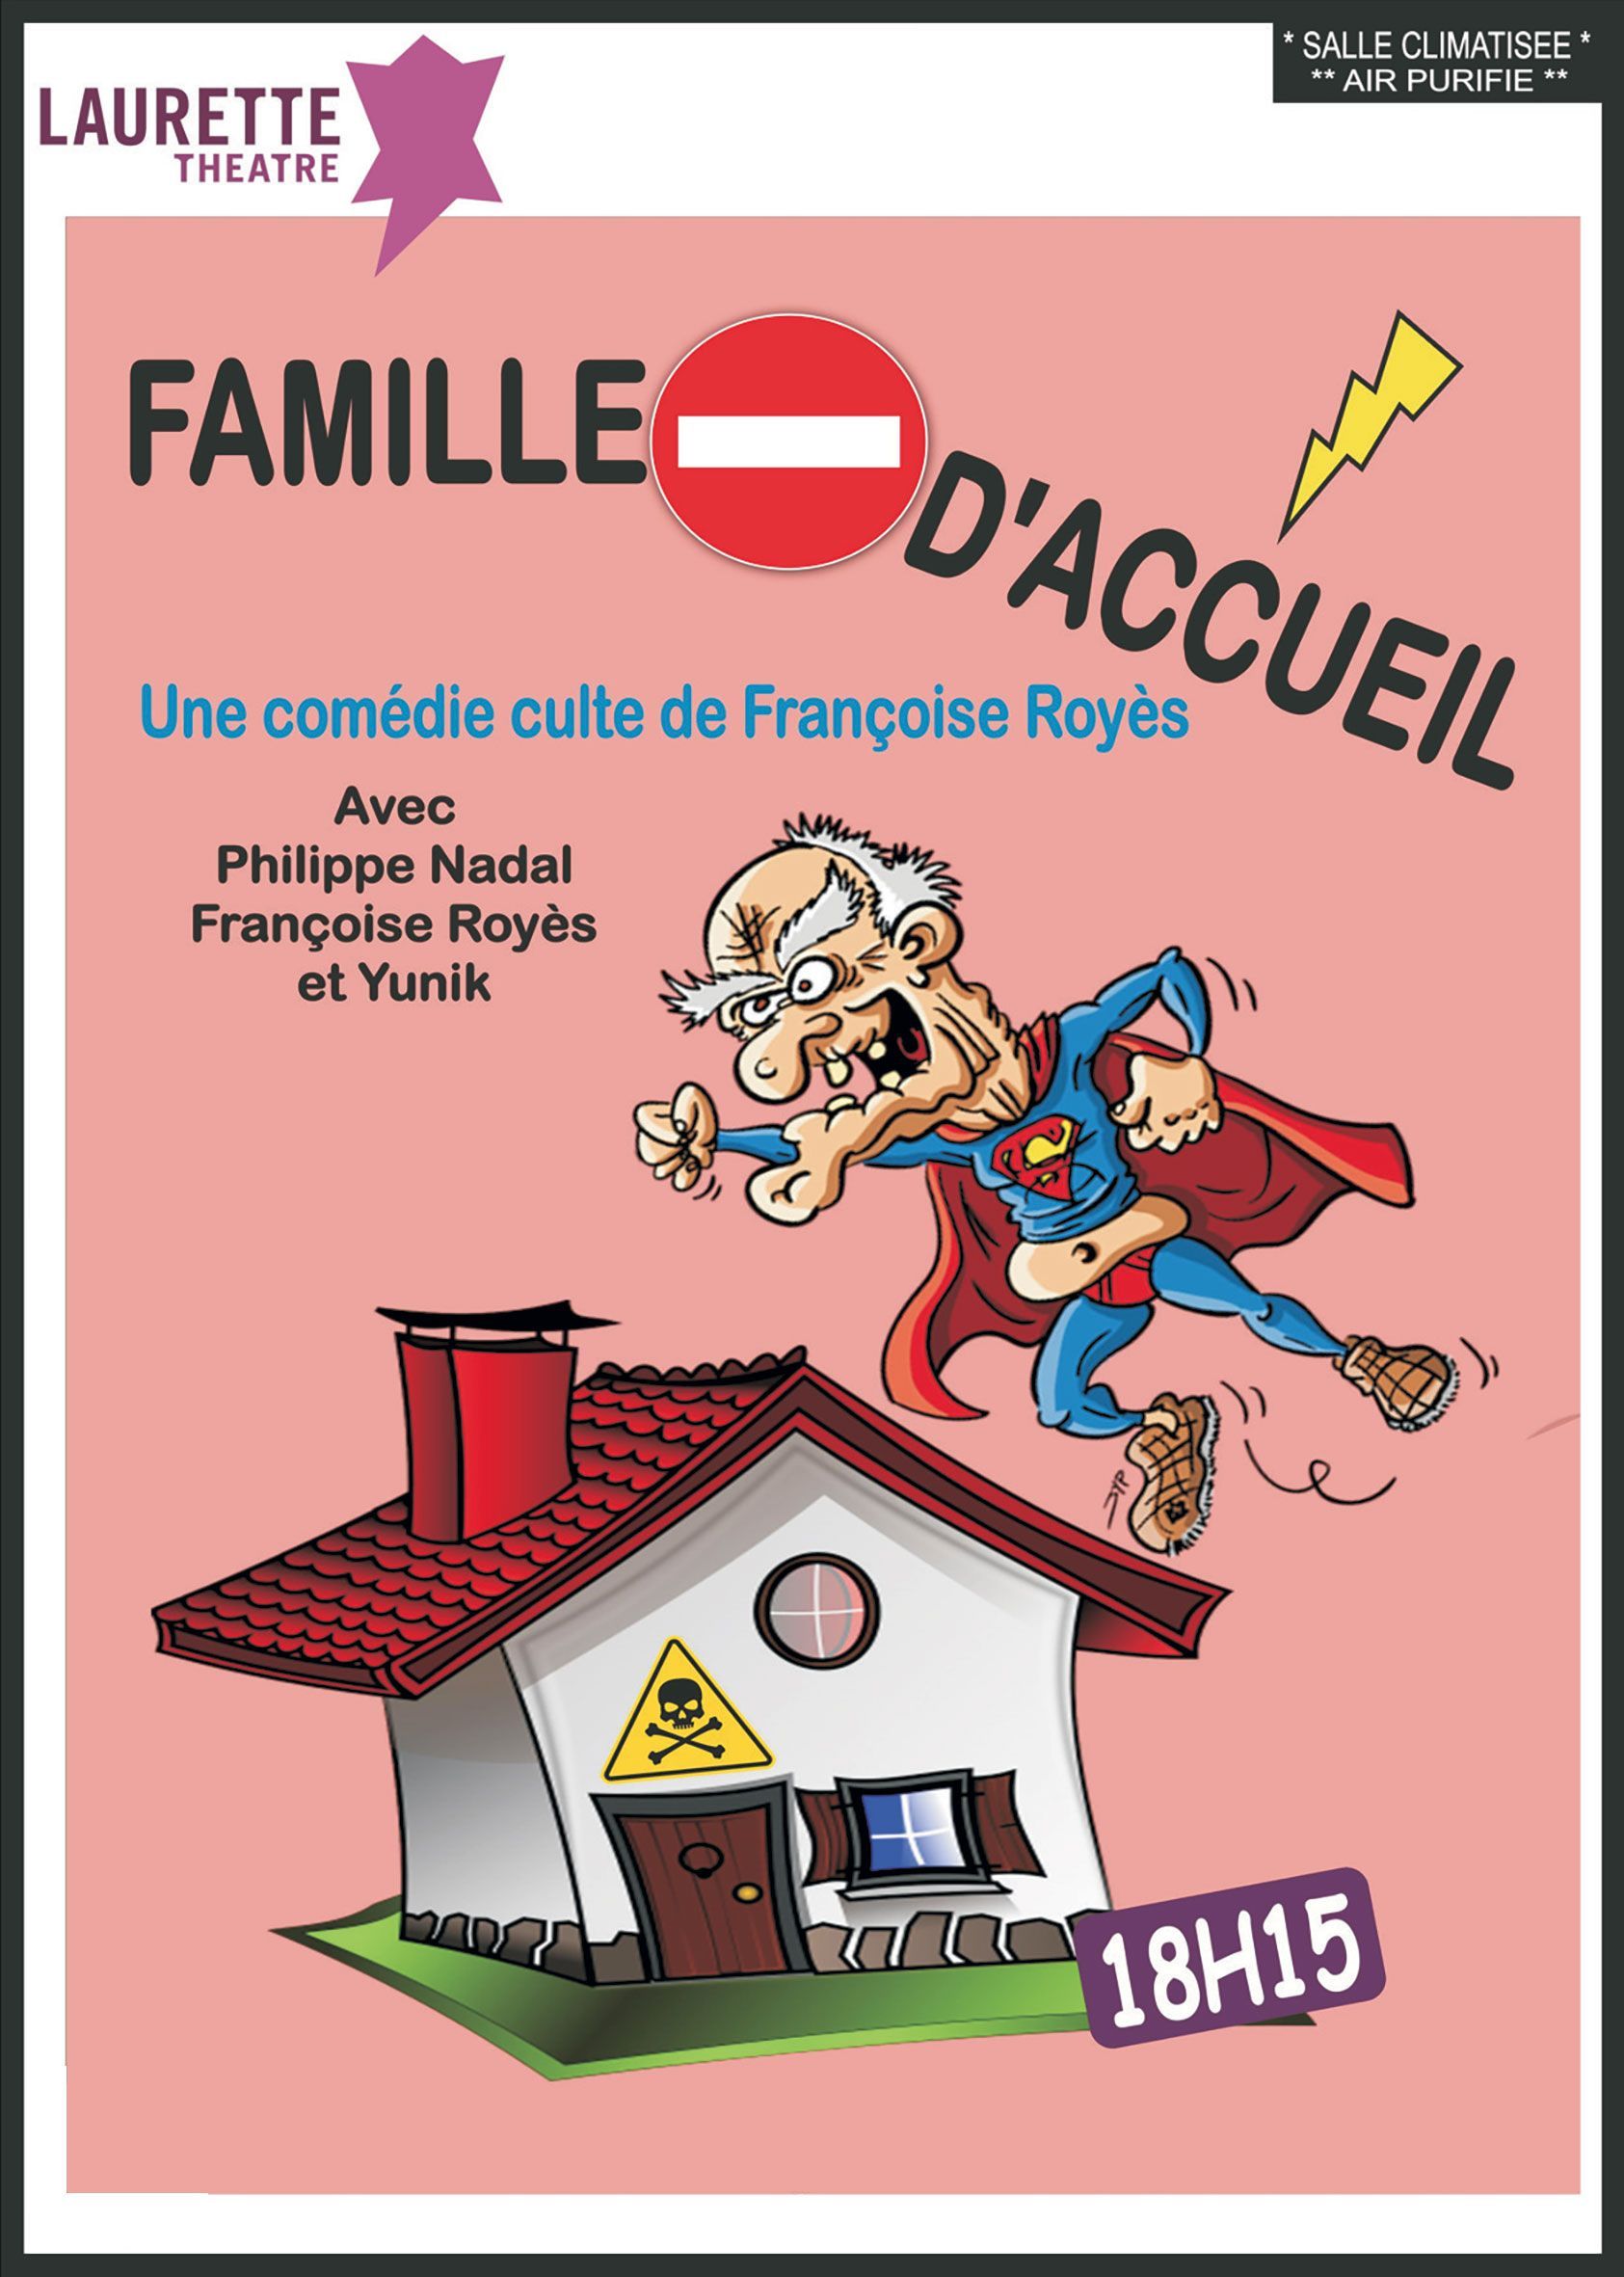 a poster for a comedy called famille d' accueil